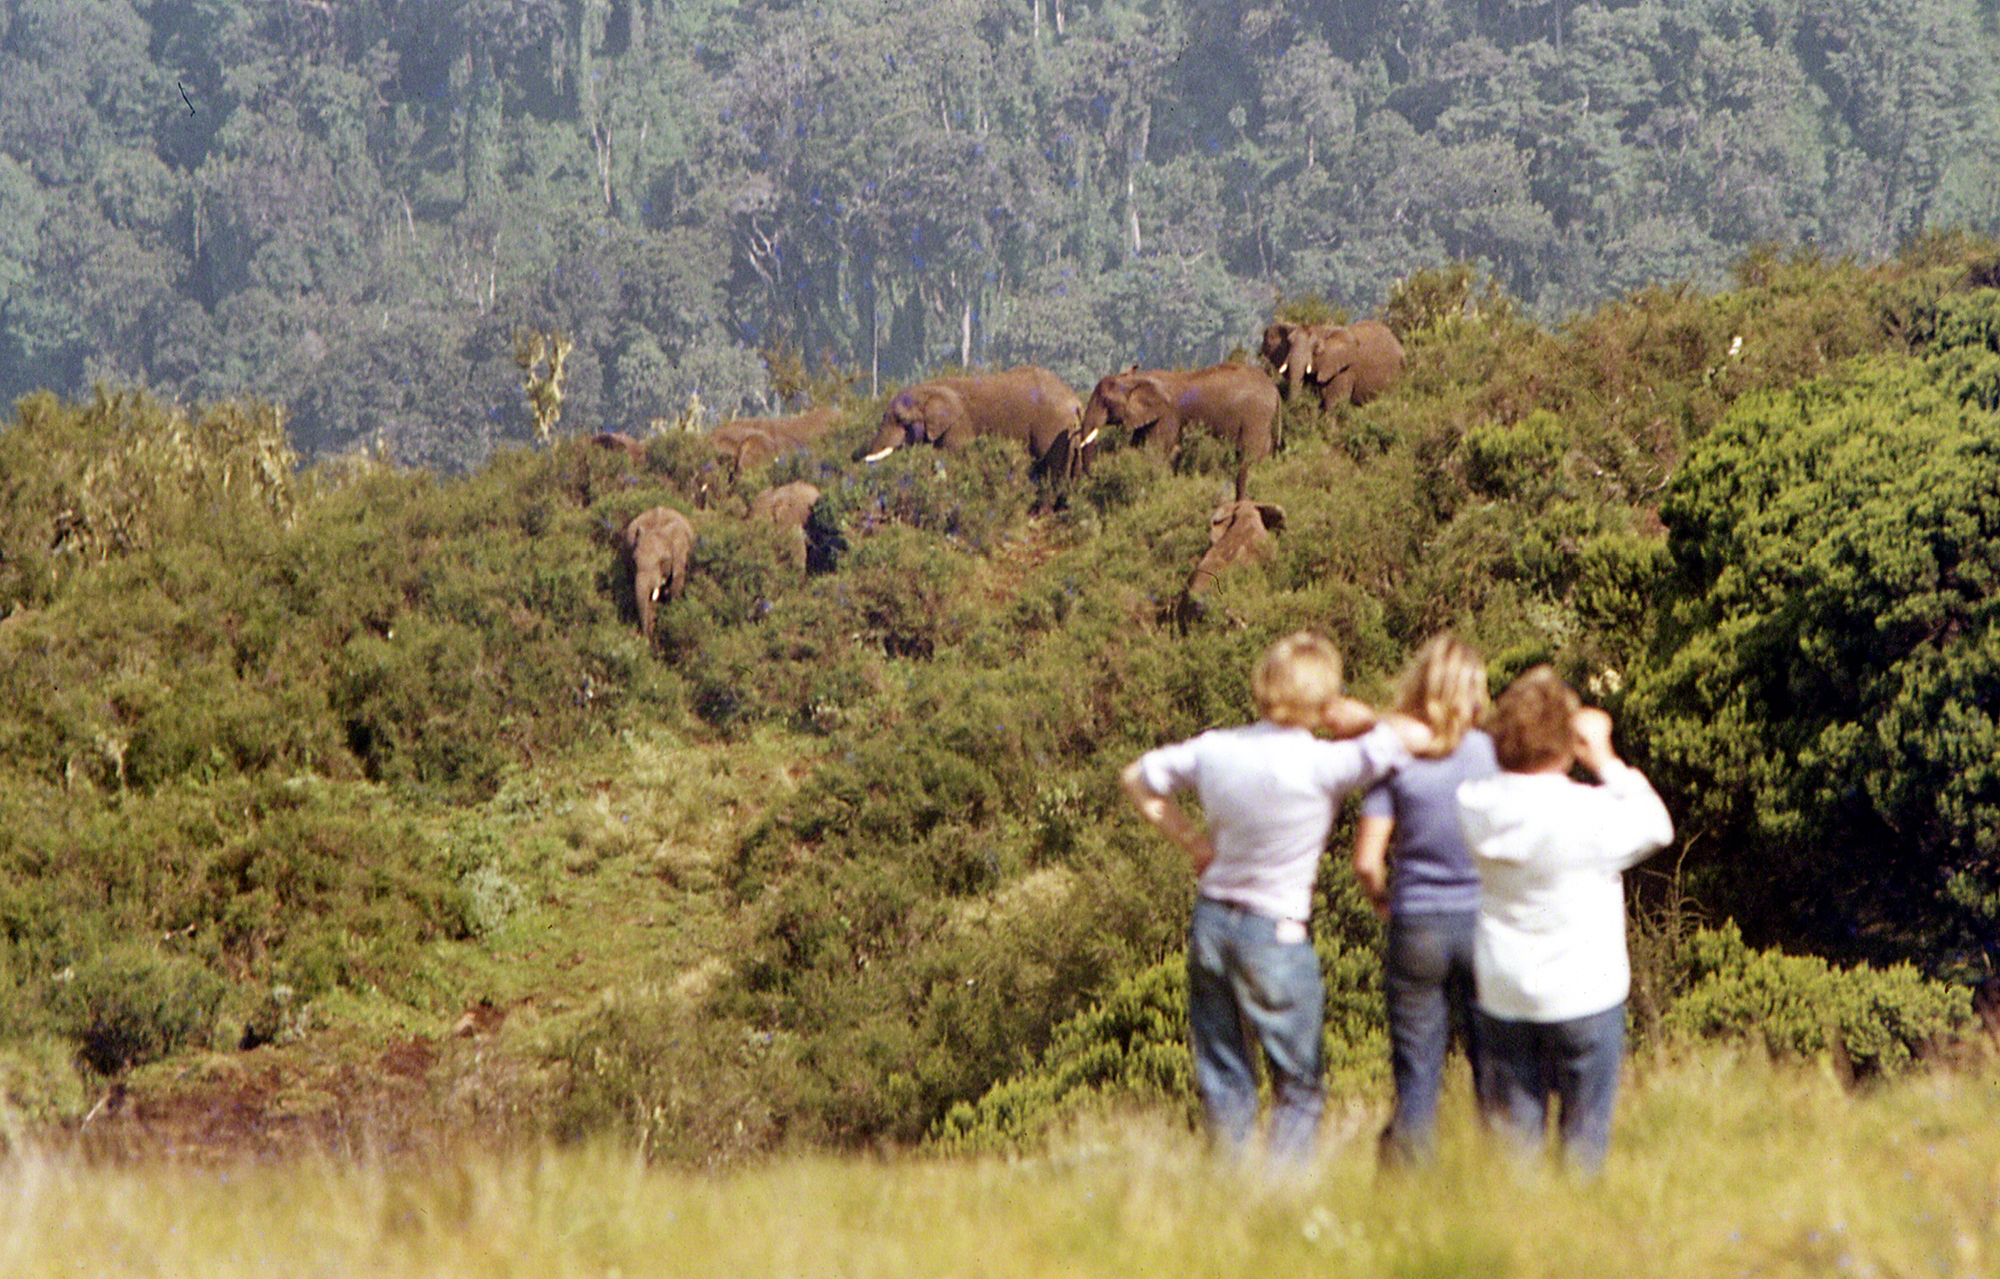 A photo of Anne's mother (on the right) and Anne (centre) in the wonderful Aberdare National Park in Kenya